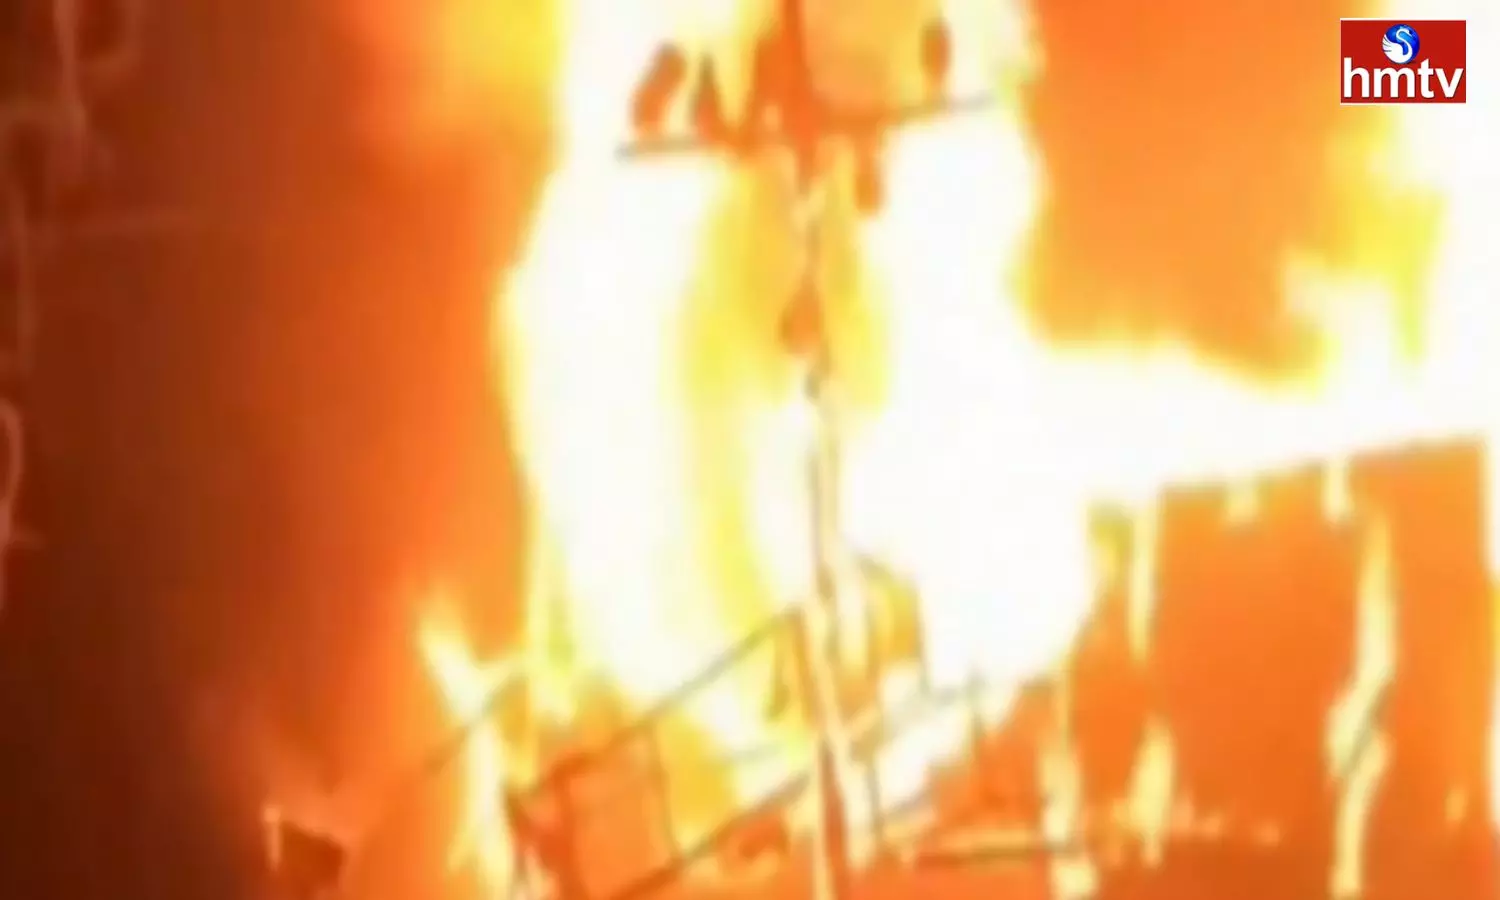 A Fire Broke out in a House in Prayagraj, UP